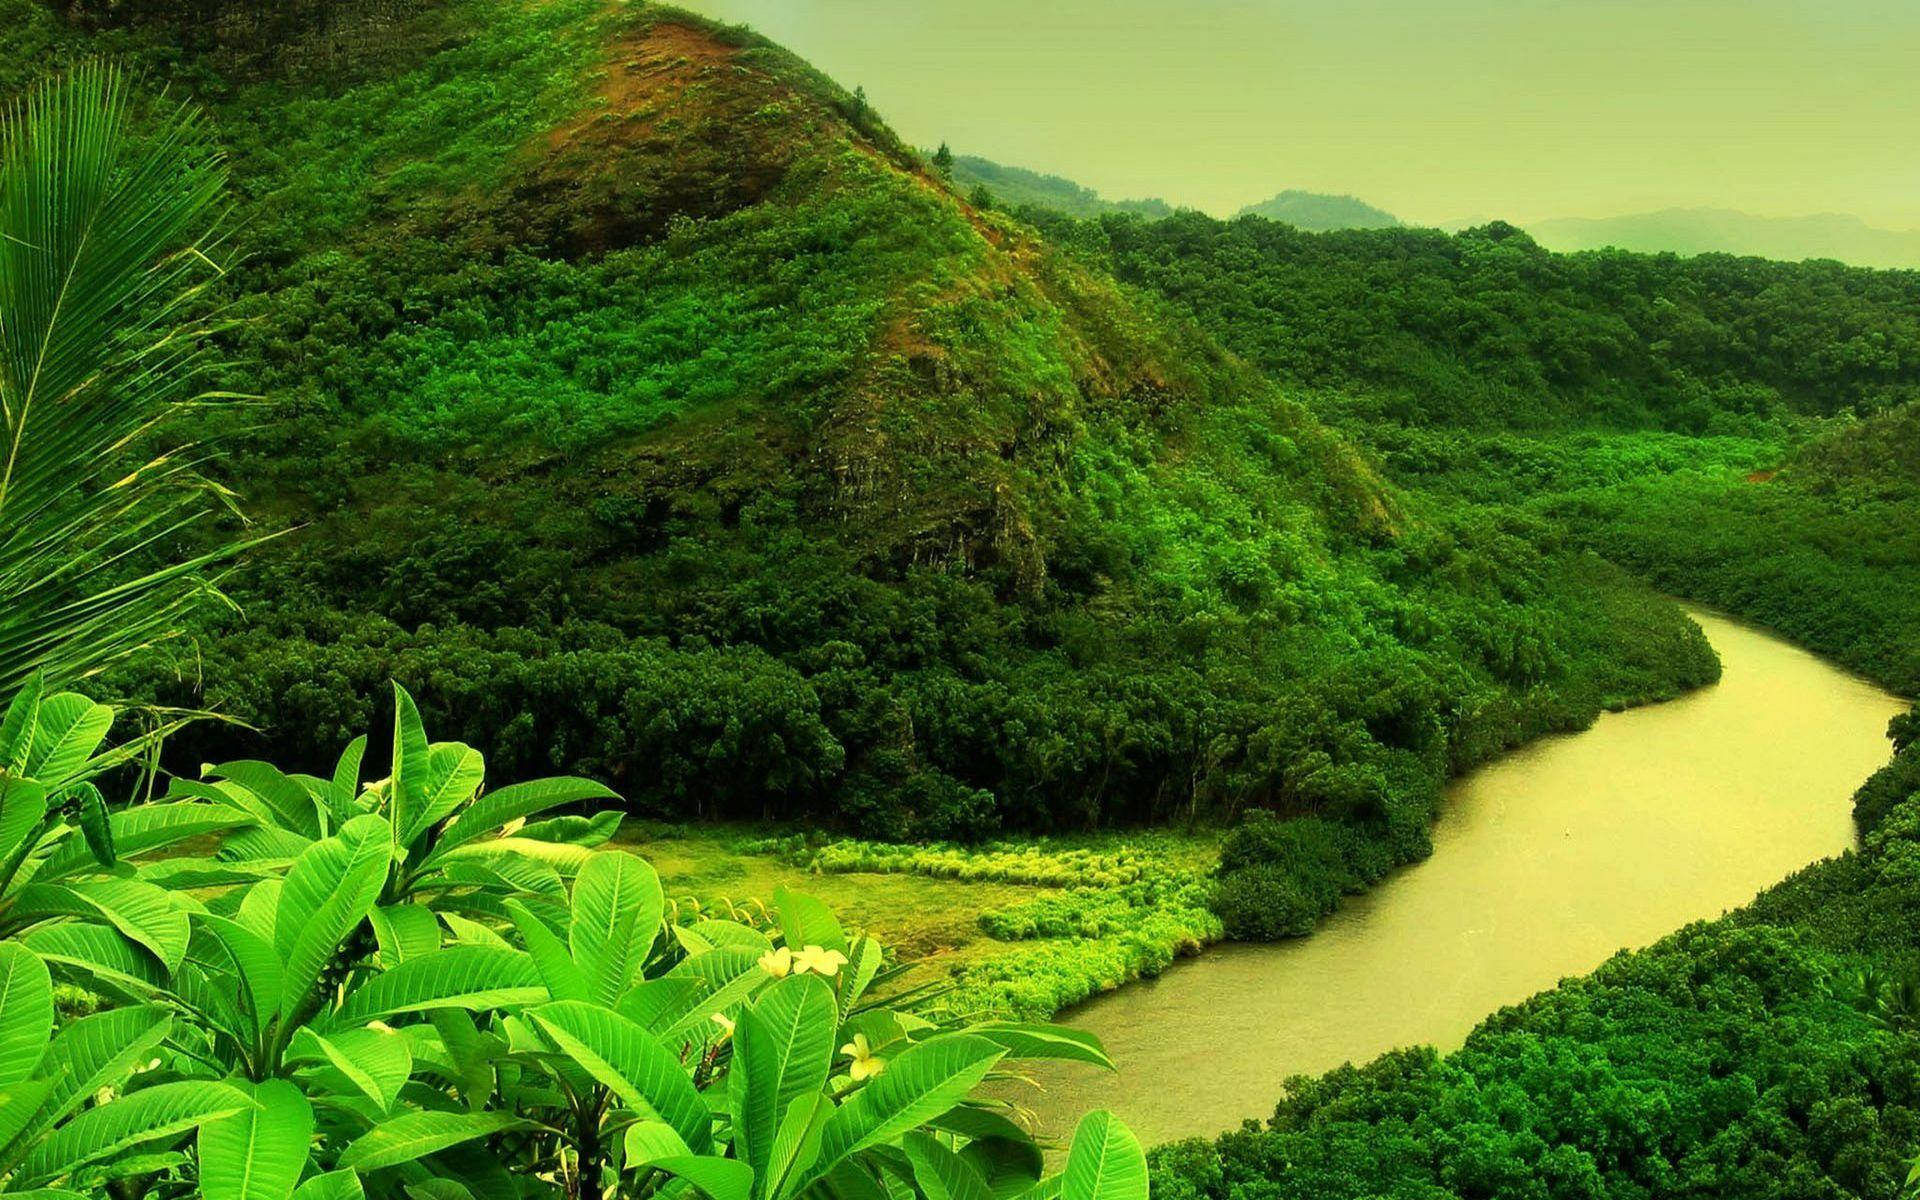 River And Greenery On Mountain